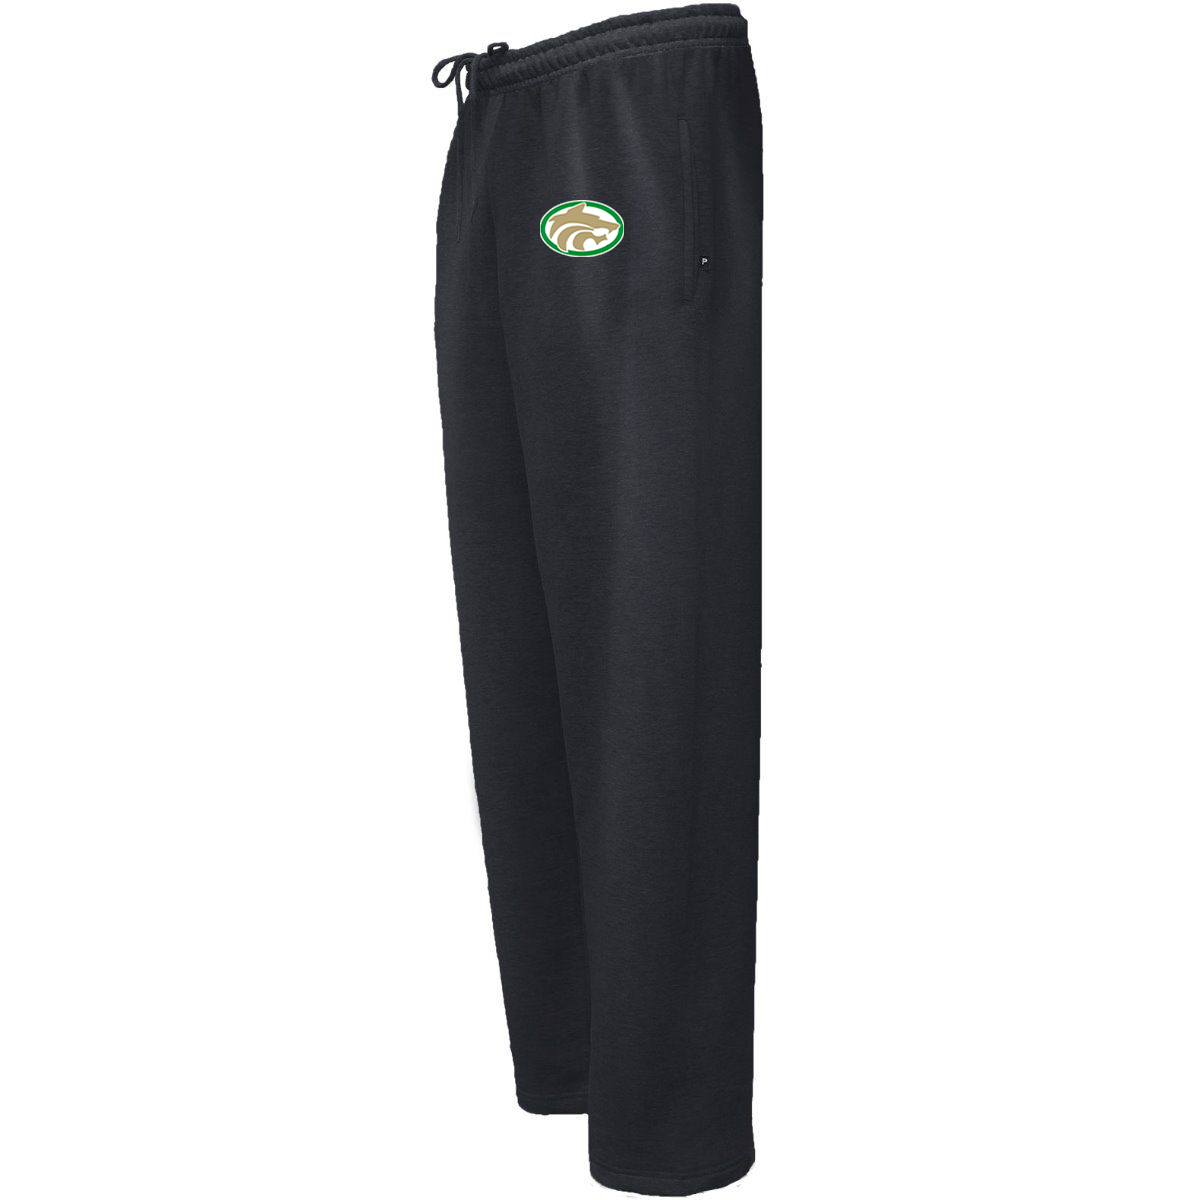 Buford Youth Lacrosse Sweatpants